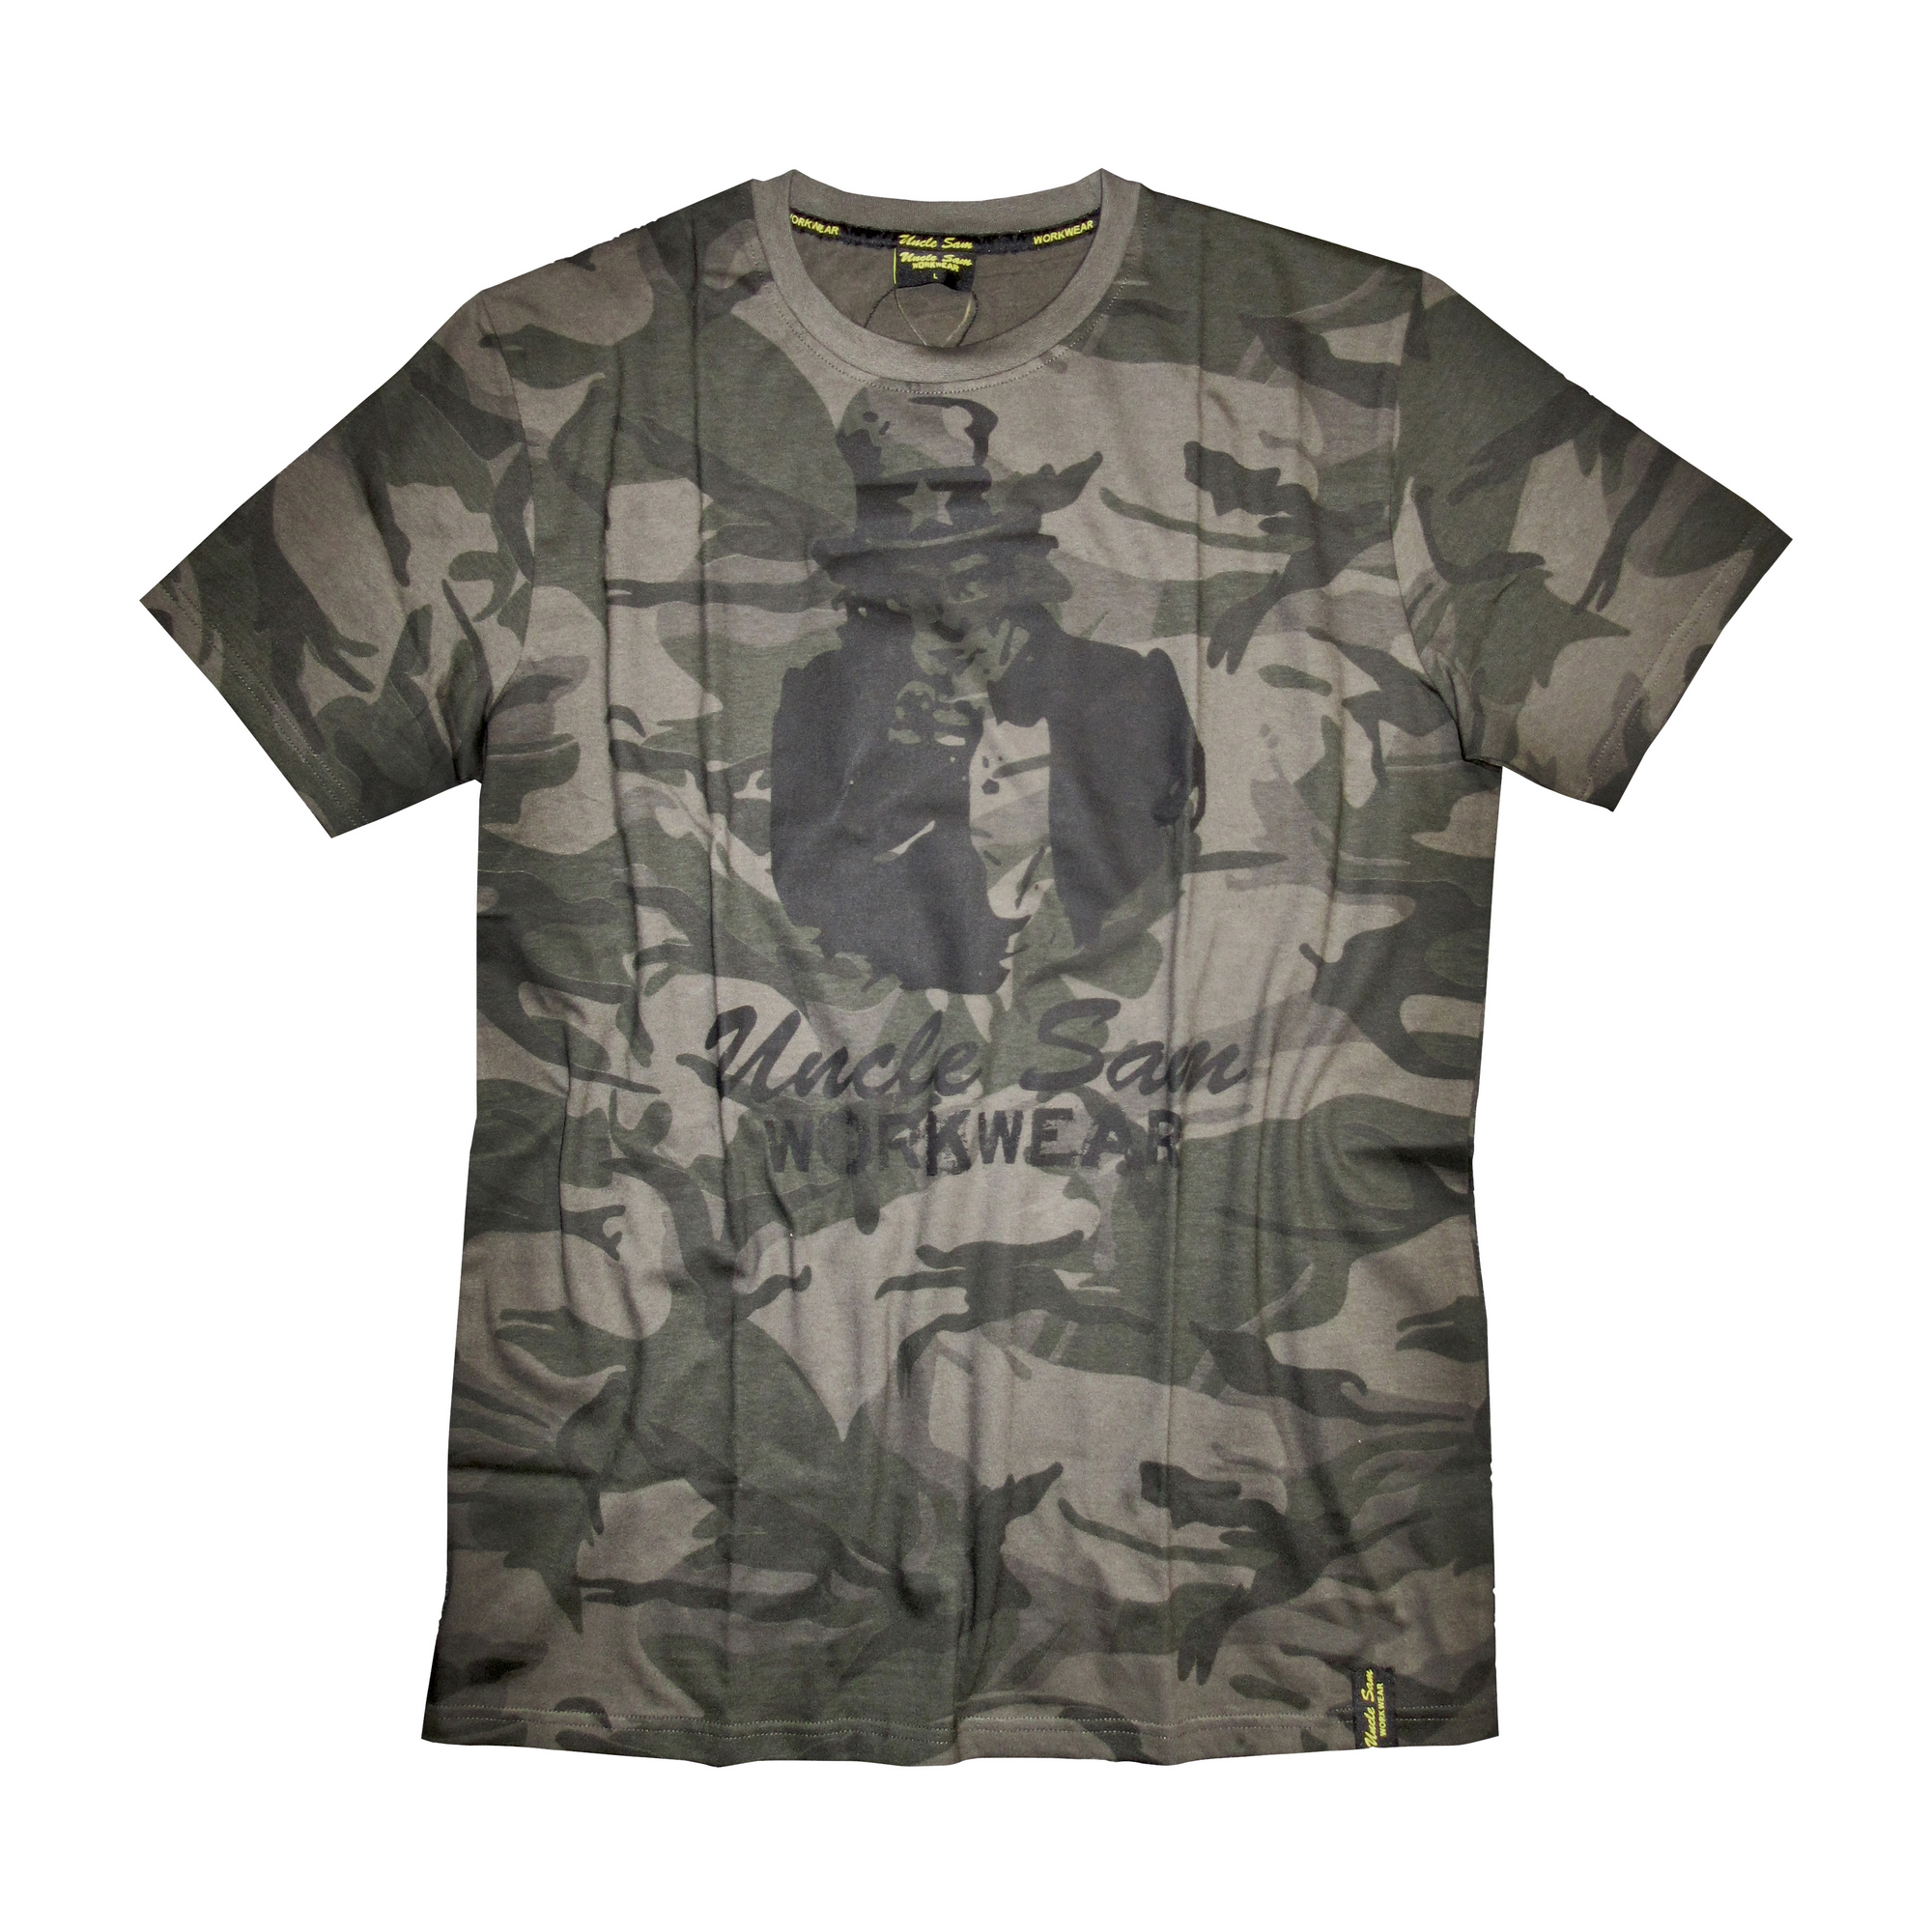 T-Shirt 'Workwear' olive/camouflage L, Baumwolle + product picture